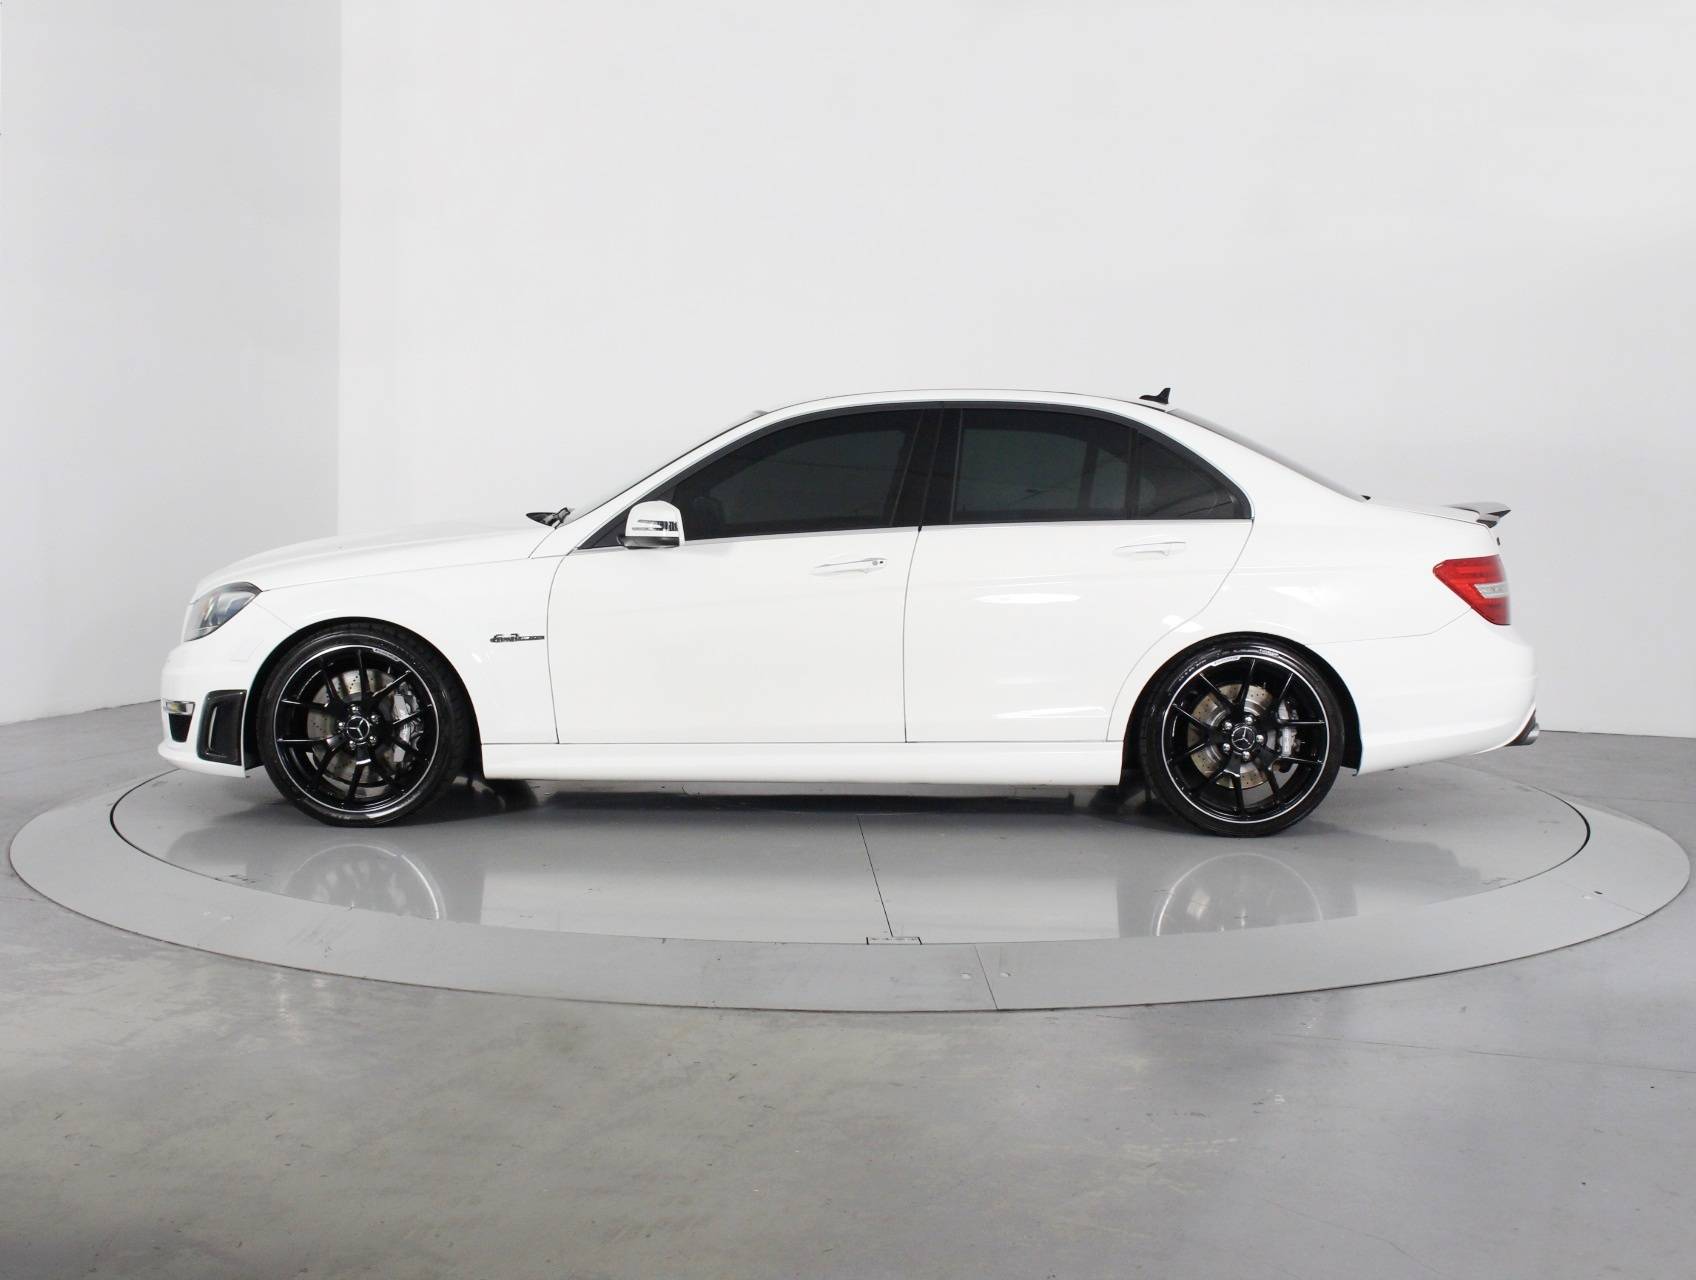 Used 14 Mercedes Benz C Class C63 Amg Sedan For Sale In West Palm Fl 456 Florida Fine Cars